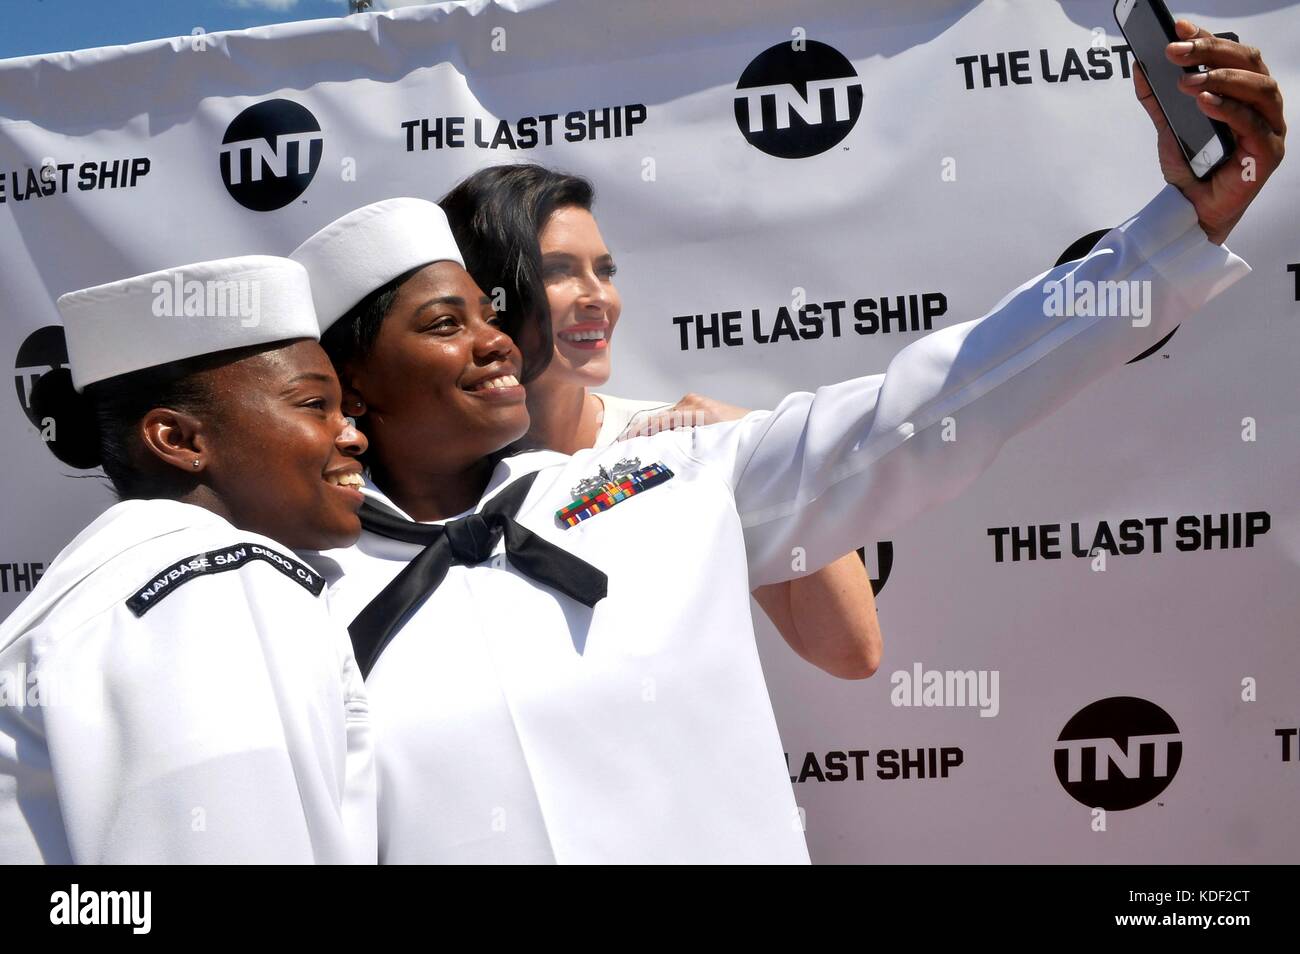 U.S. sailors take a selfie photo with actress Bridget Regan on the red carpet during the Season 4 premiere of the TNT TV show The Last Ship at the Naval Base San Diego Theater July 23, 2017 in San Diego, California.   (photo by Indra Bosko  via Planetpix) Stock Photo